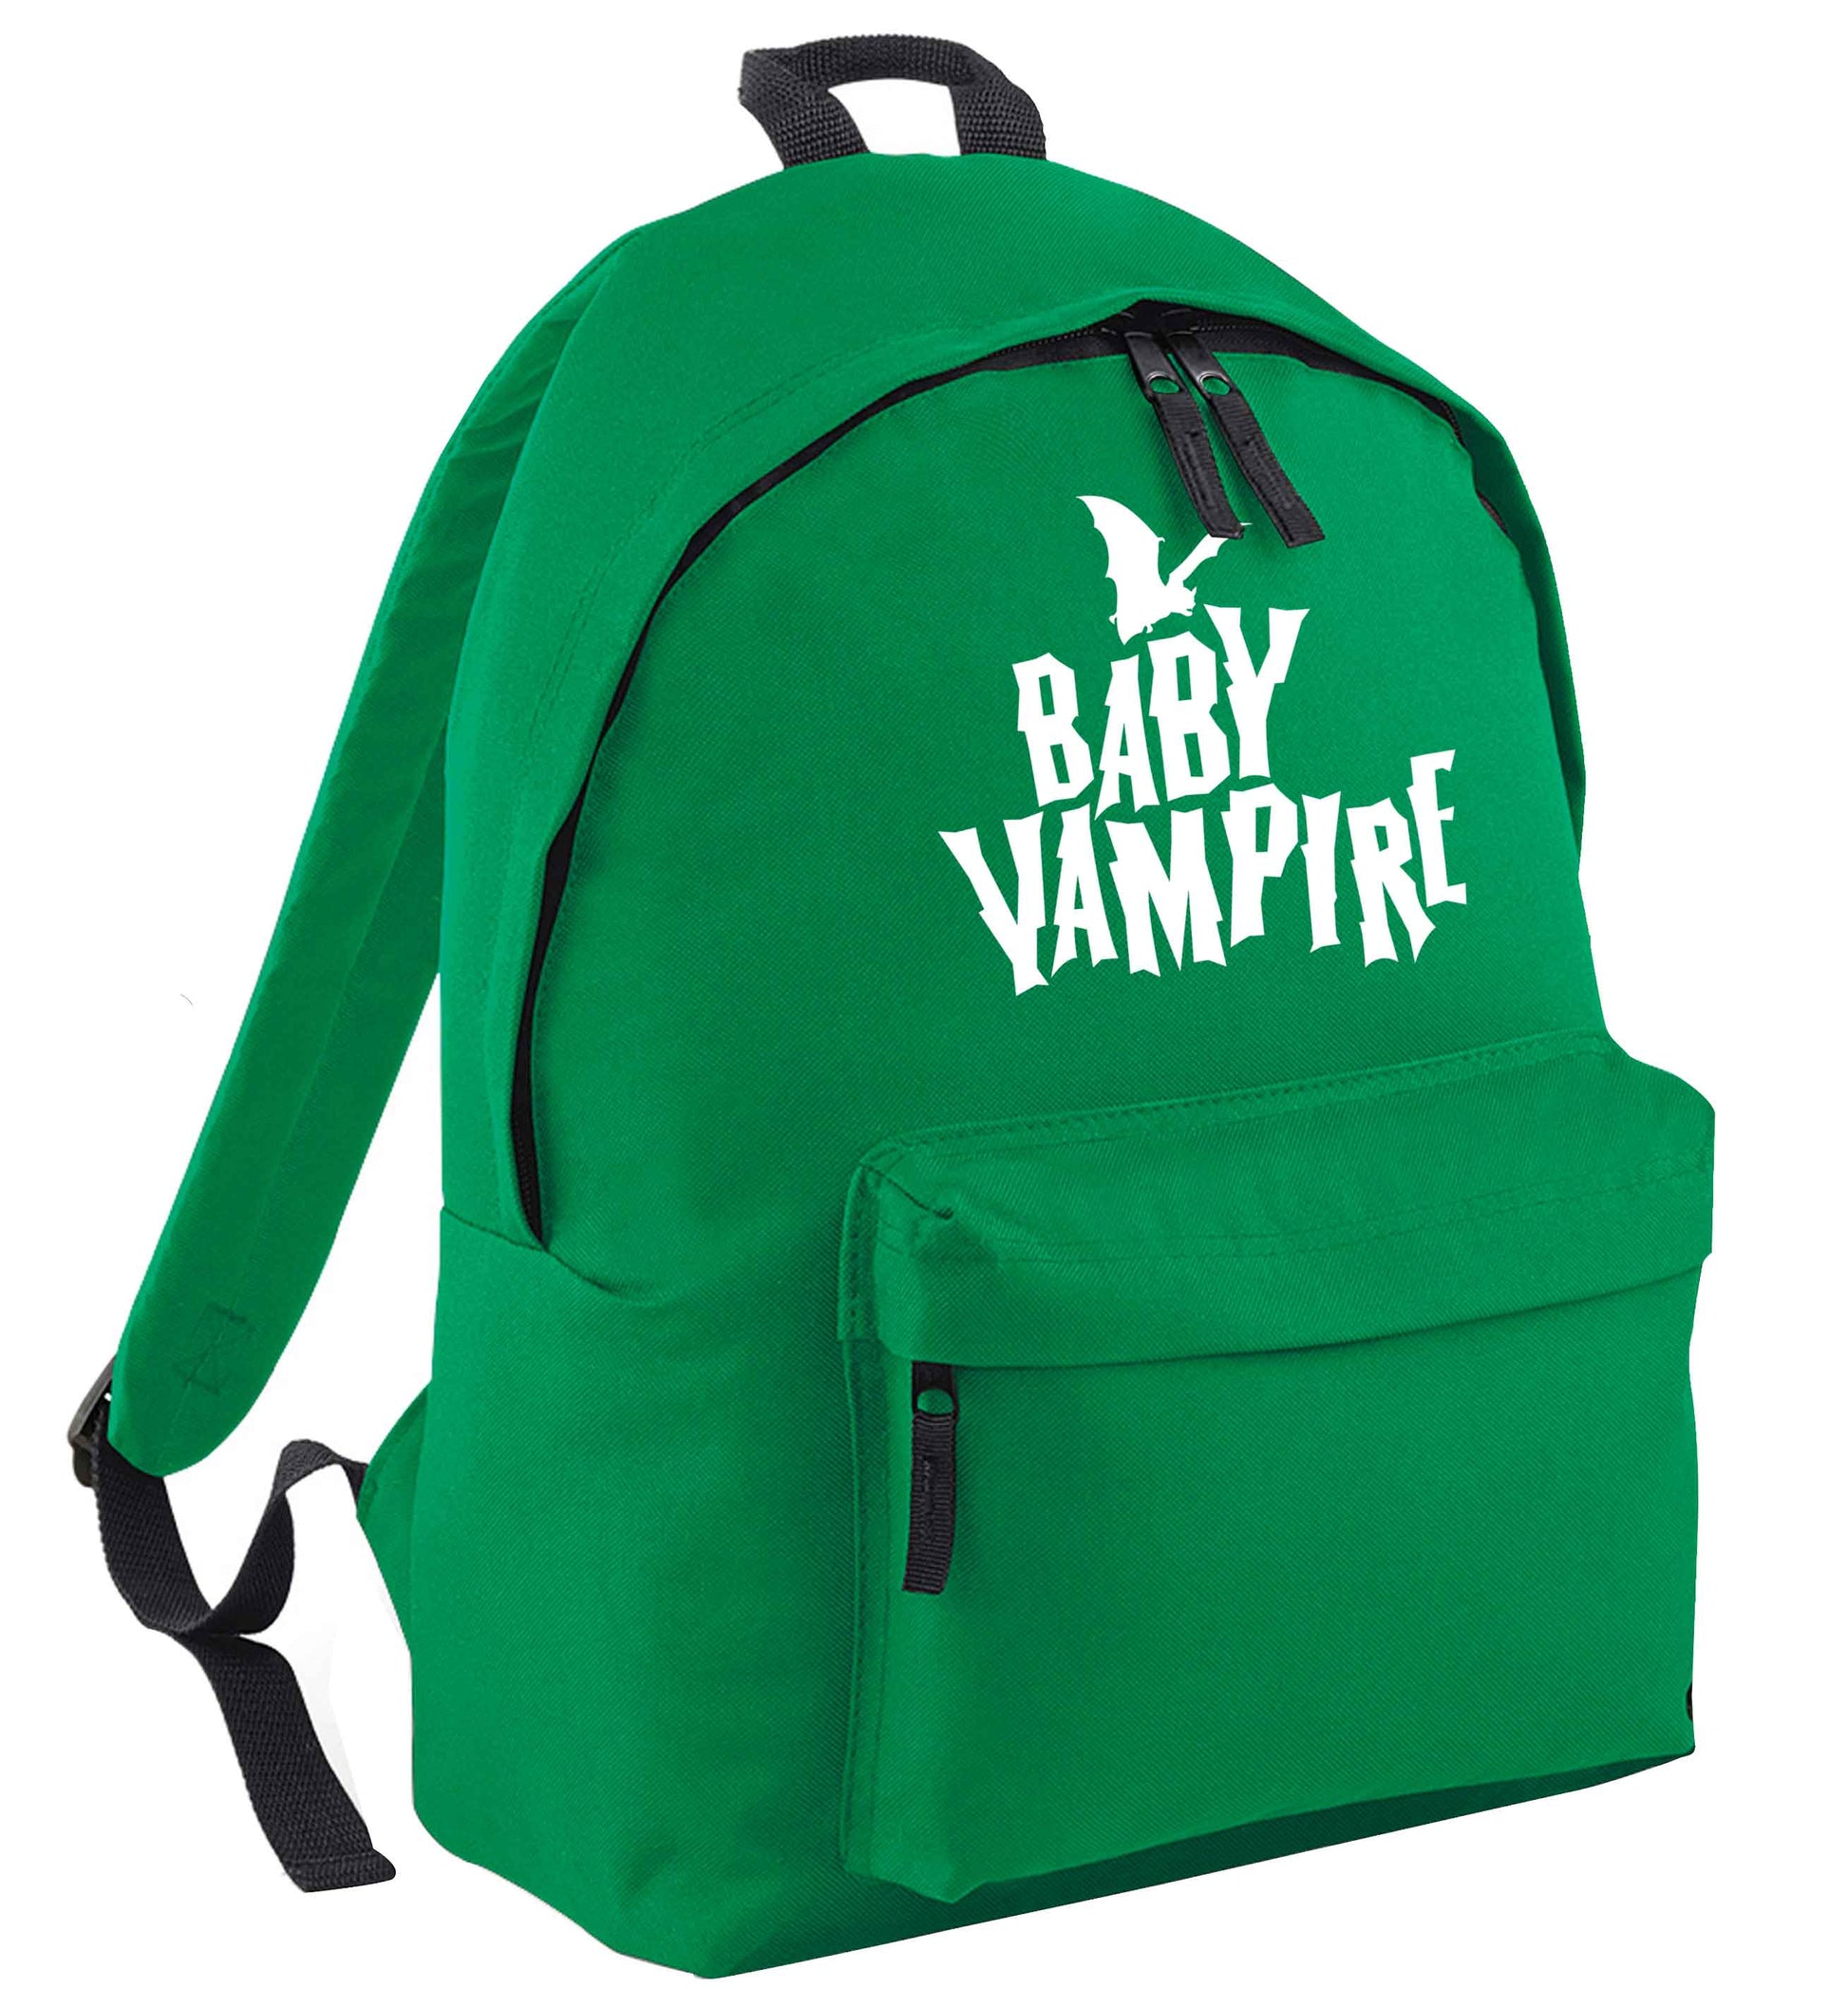 Baby vampire green adults backpack